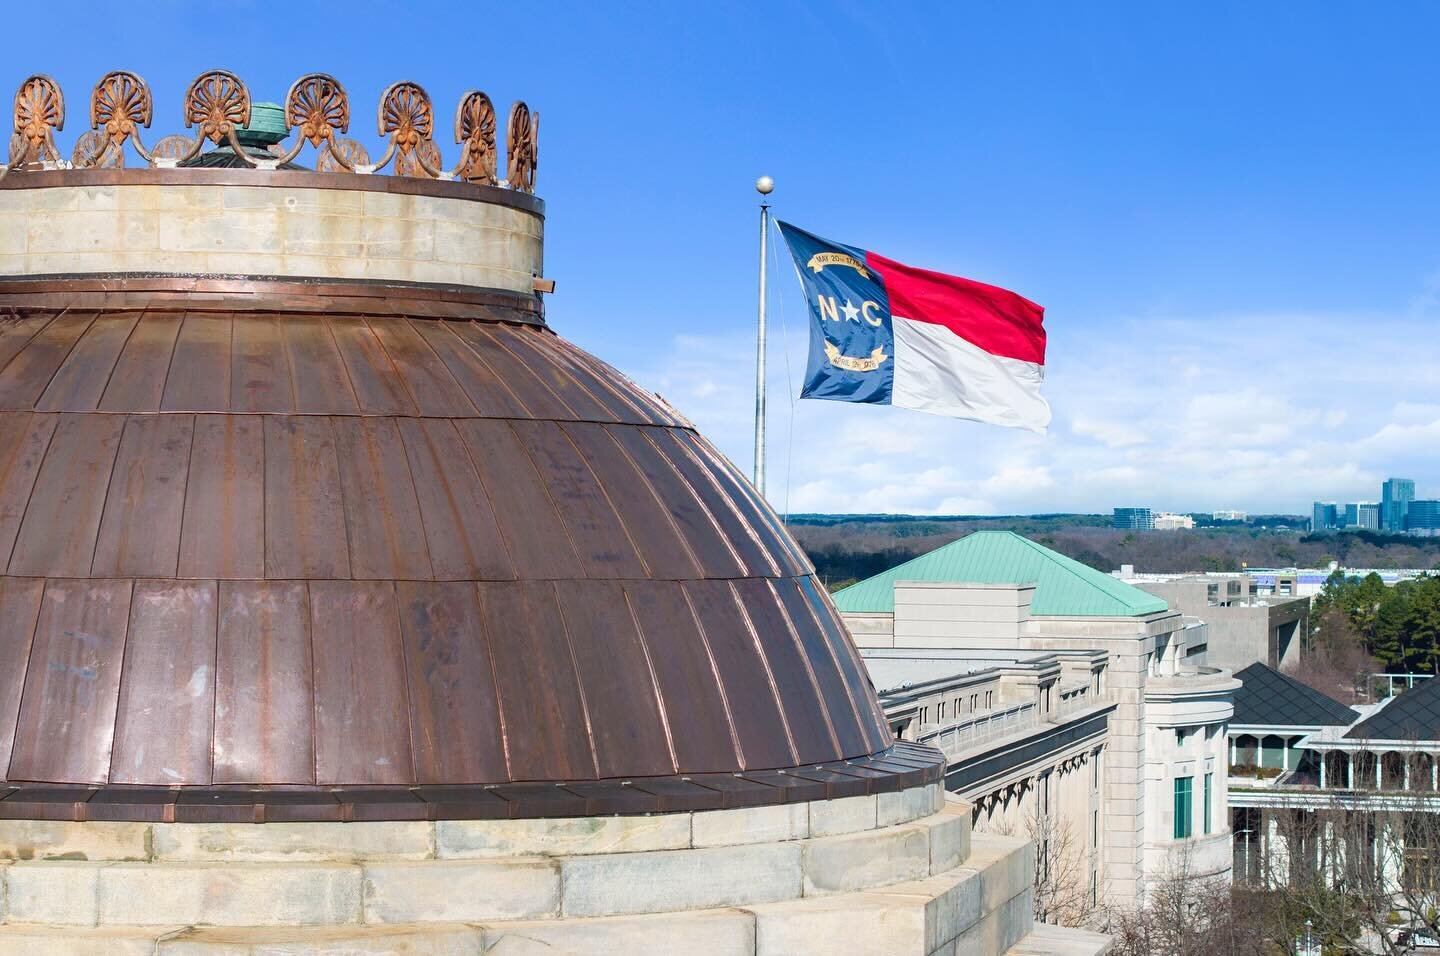 Beautiful day at @ncstatecapitol Raleigh, NC! 
&bull;
#raleighnc #dronephotography #statecapitol #ncstatecapitol #copperdome #newroof #ncflag #raleighphotographer